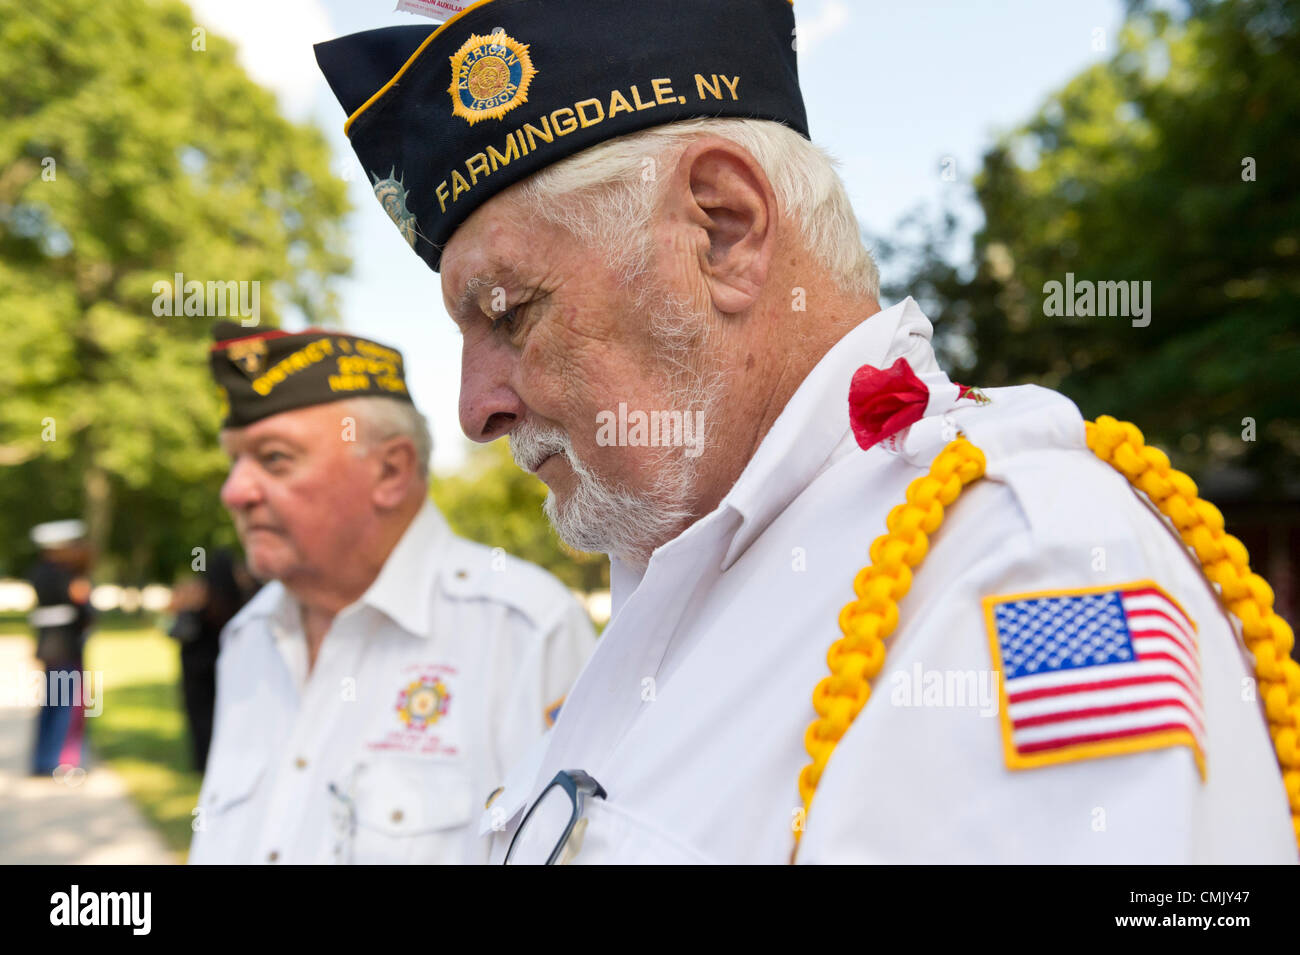 Aug. 18, 2012 - Farmingdale, New York, U.S.: (L-R) BOB FULLAM, of Veterans of Foreign Wars of U.S. Post 516 and District One Commander, and PHIL STREHL, Vice Commander of Farmingdale Post 449 of American Legion, are among hundreds who attend the burial ceremony of Marine Lance Corporal Greg Buckley Jr, 21 - the Oceanside native killed in Afghanistan 9 days earlier - at Long Island National Cemetery. Stock Photo